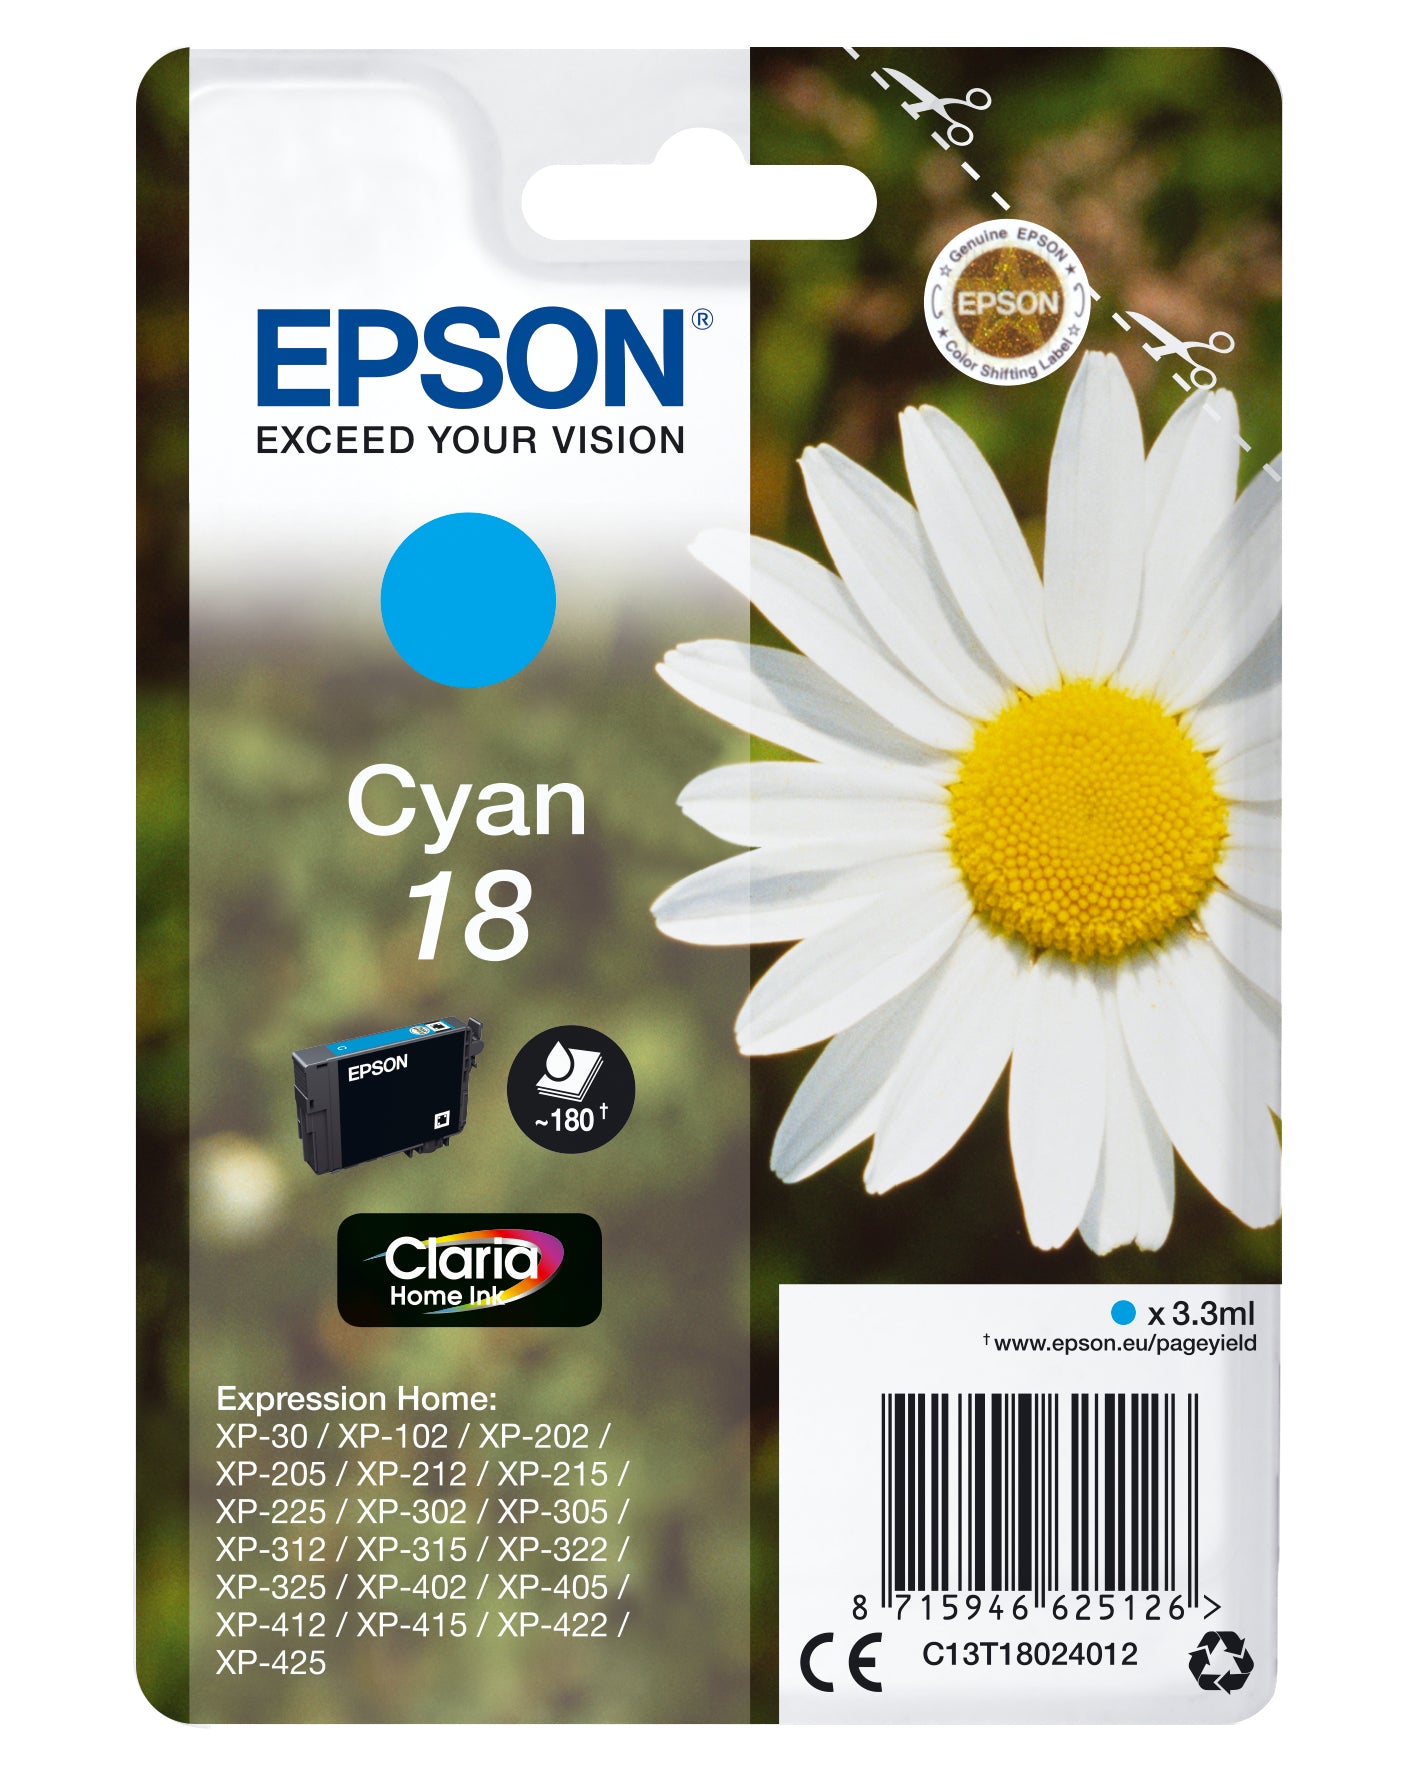 Epson C13T18024012/18 Ink cartridge cyan, 180 pages 3ml for Epson XP 30